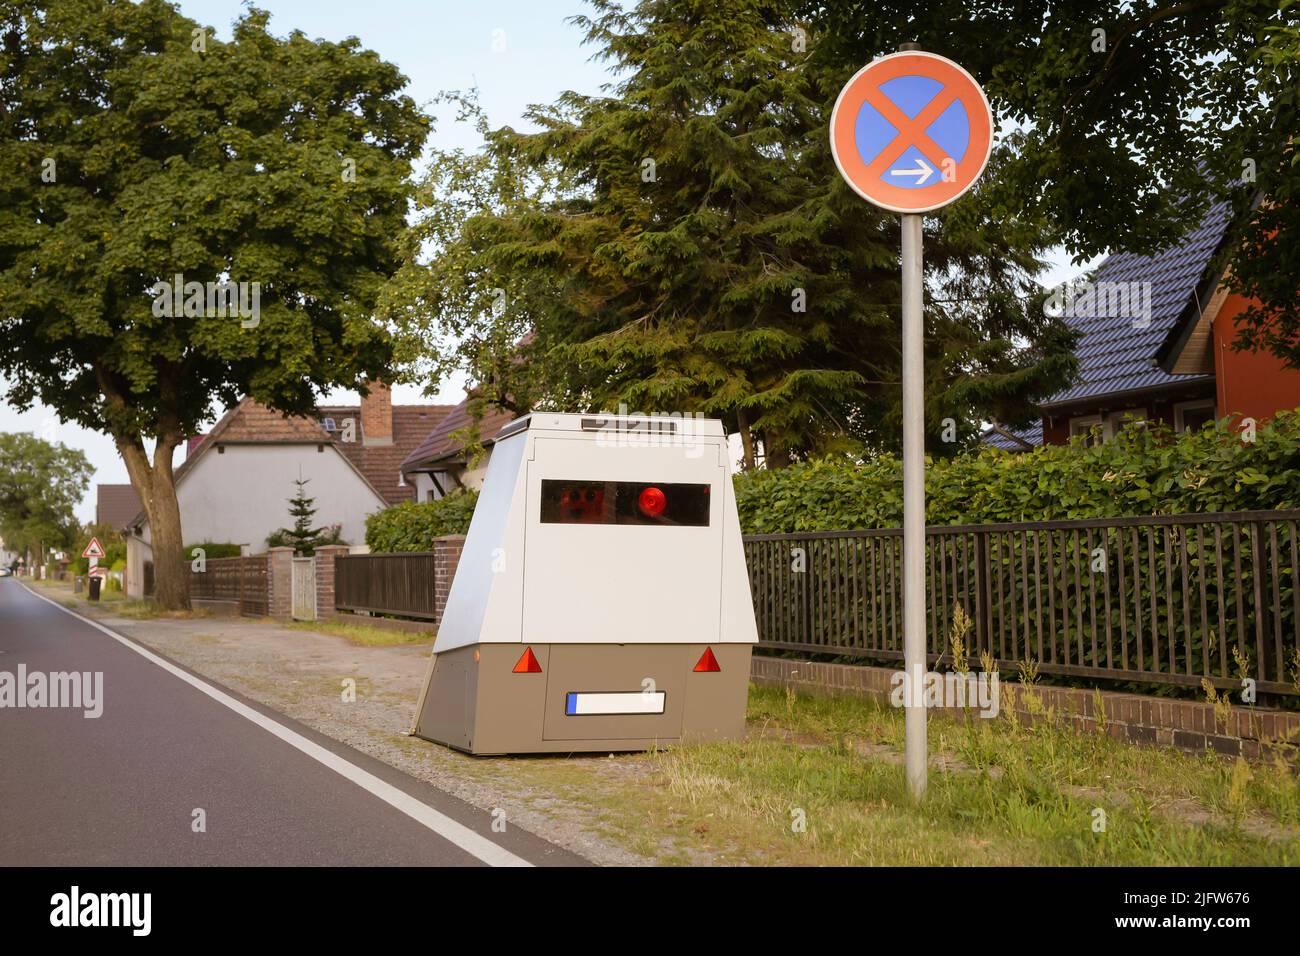 A speed camera trailer placed at the roadside Stock Photo